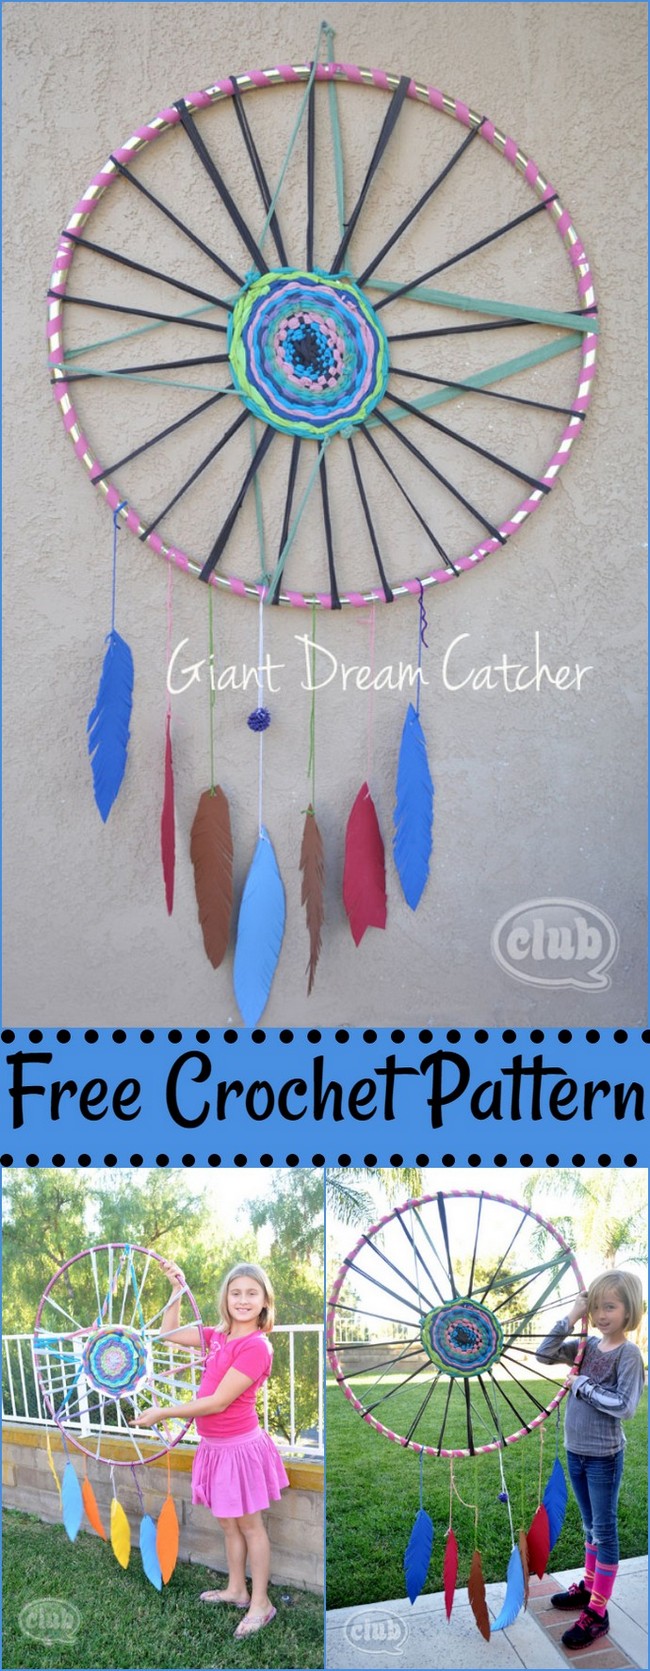 Giant Dream Catcher Craft For Tweens With Big Dreams